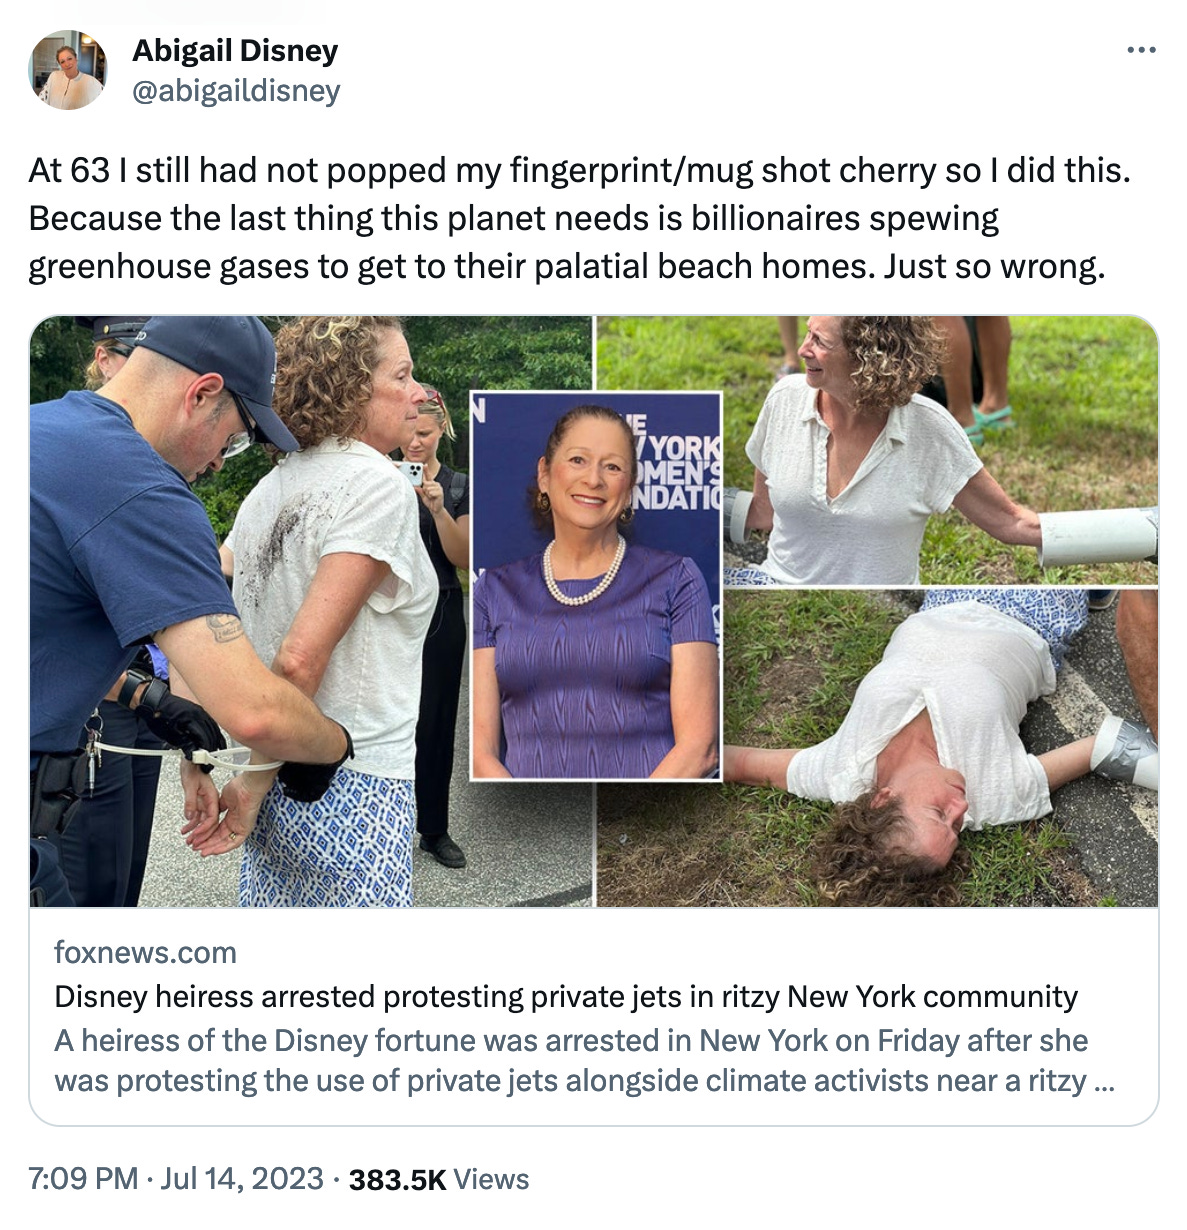 A tweet from Abigail Disney that says, "At 63 I still had not popped my fingerprint/mug shot cherry so I did this. Because the last thing this planet needs is billionaires spewing greenhouse gases to get to their palatial beach homes. Just so wrong." She has linked to a Fox news article with the headline, "Disney heiress arrested protesting private jets in ritzy New York community".